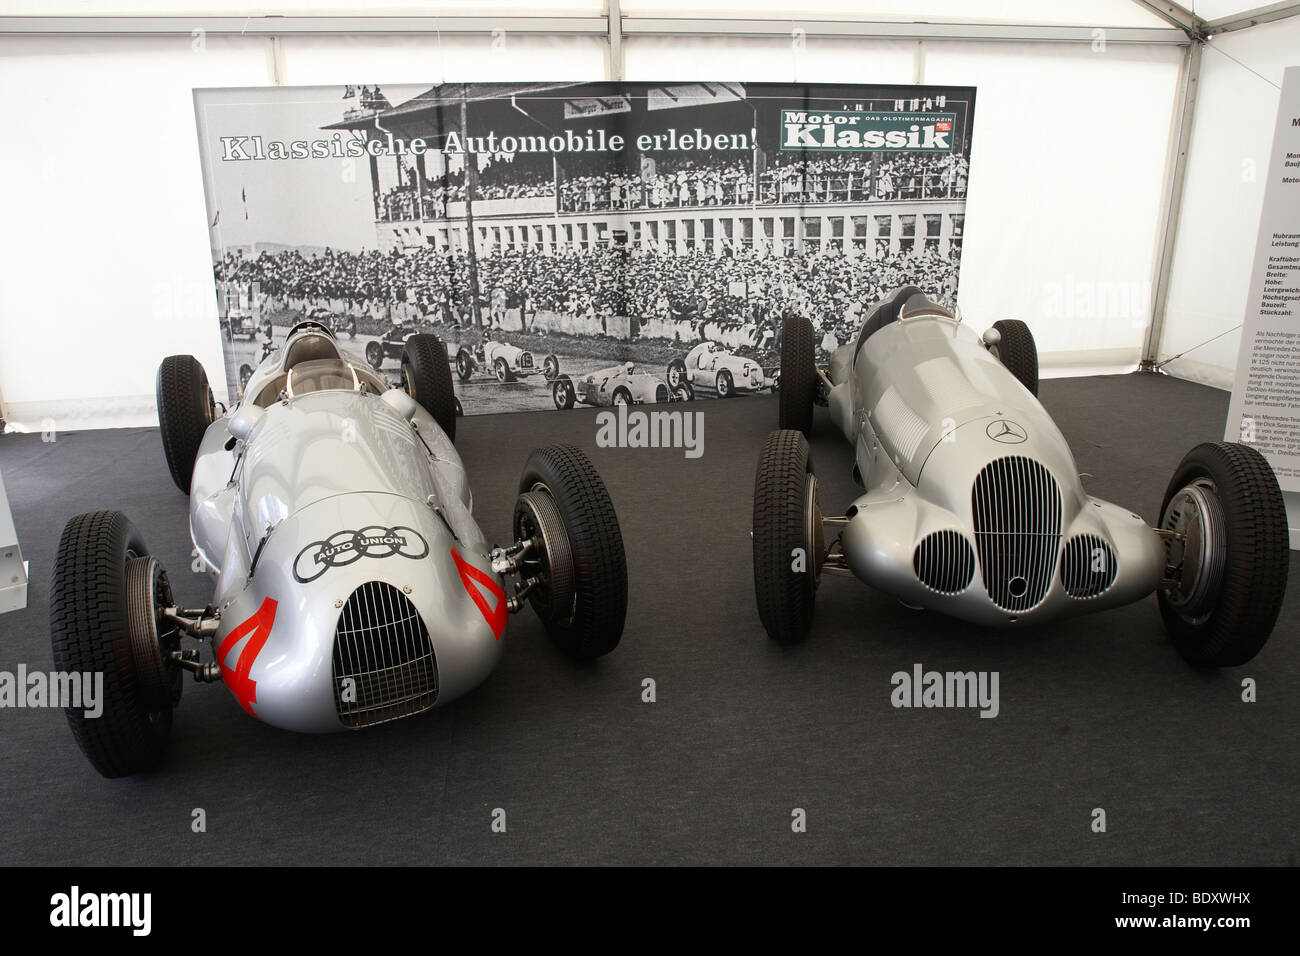 Mercedes-Benz W125 Silberpfeil, built in 1937, and the Auto Union type D, built in 1938, AvD Oldtimer Grand Prix 2009, Nuerburg Stock Photo